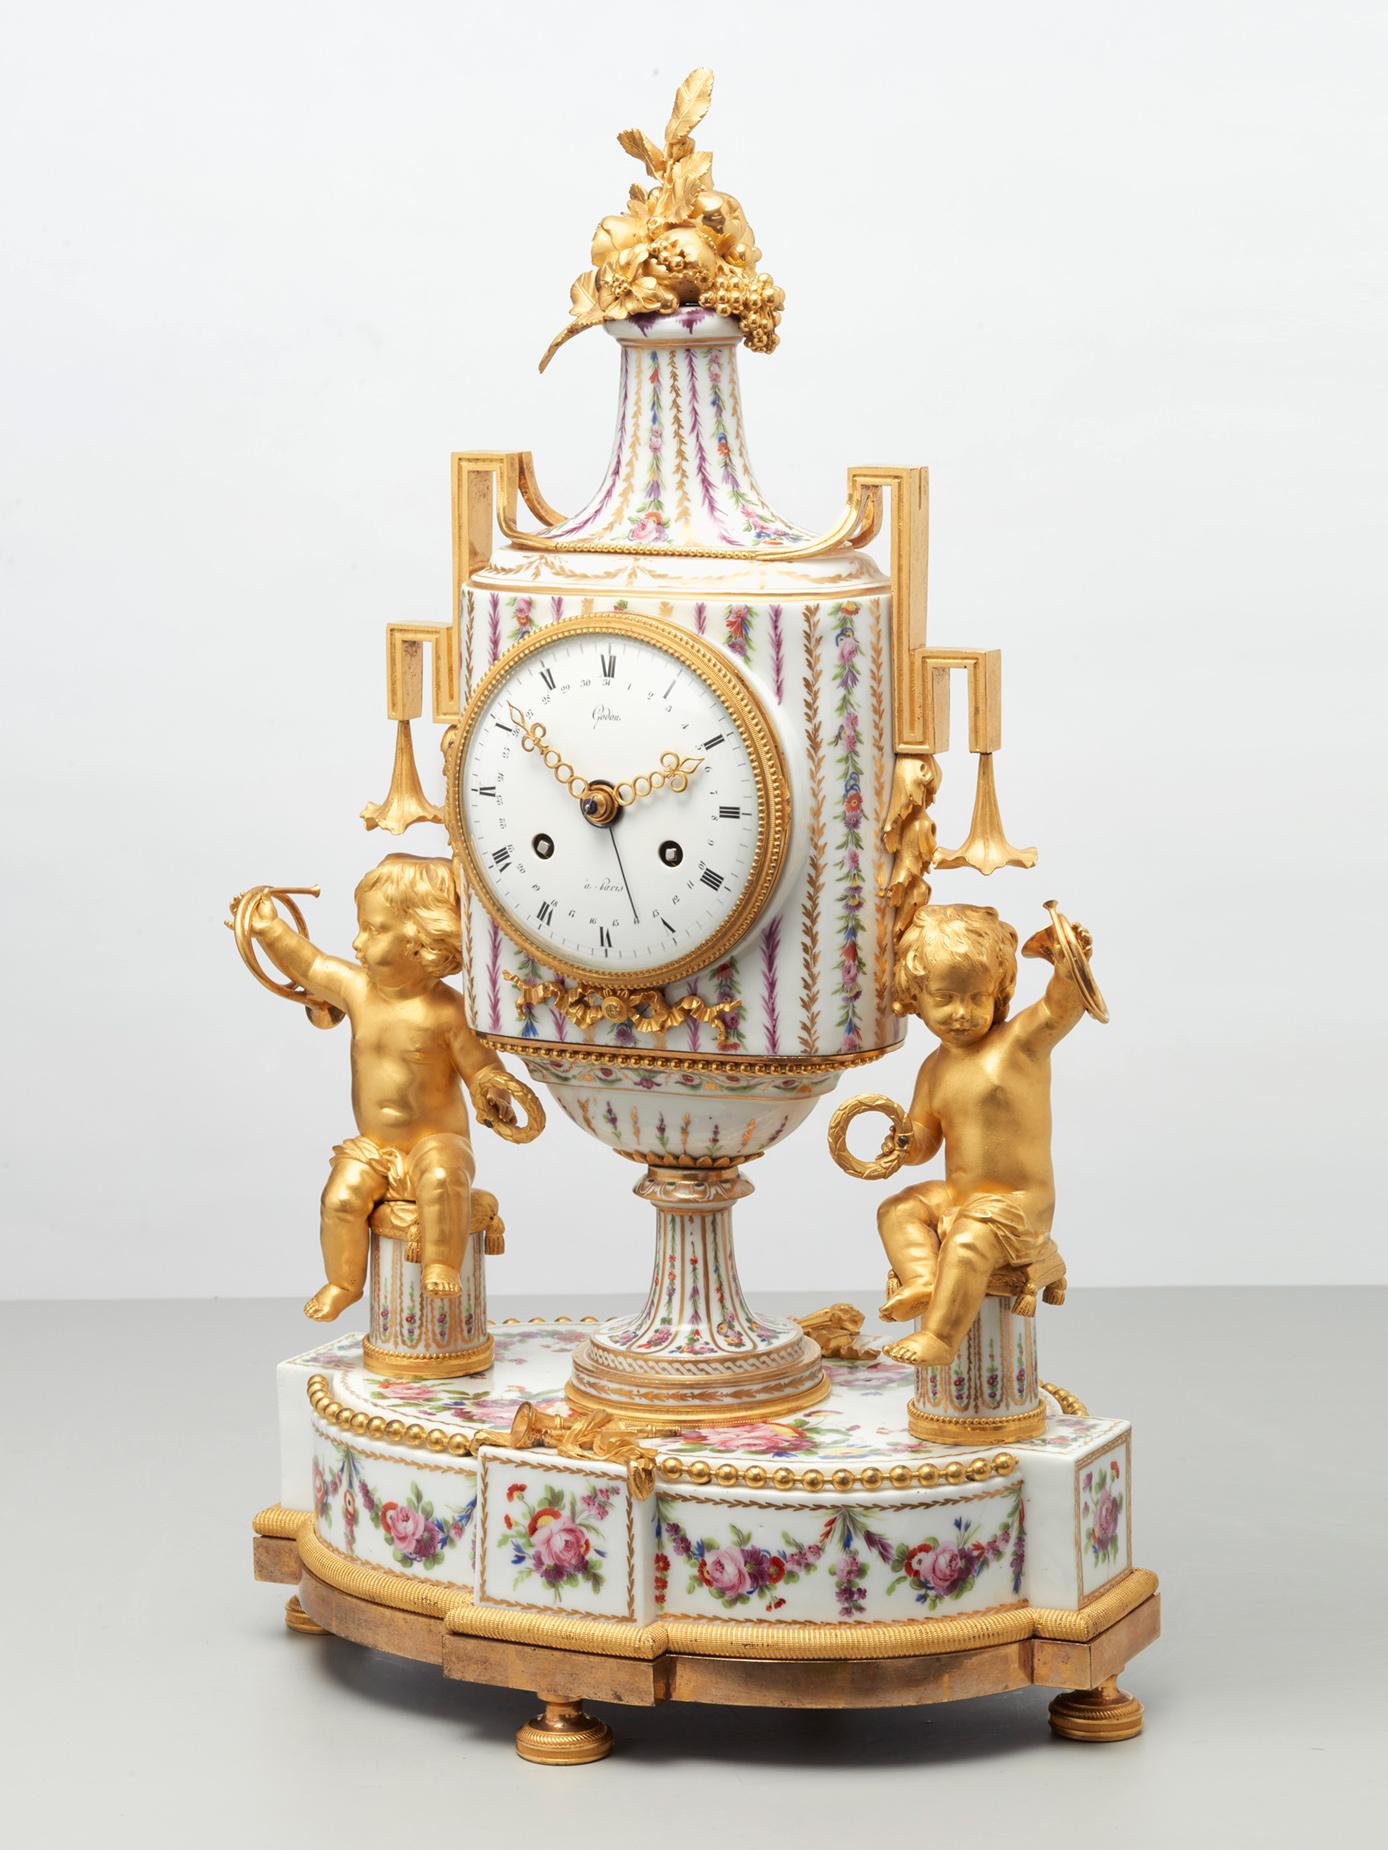 The enamel dial indicating the hours, minutes and date, bears the signature Godon a Paris. It is set in a footed vase of hard-paste Paris porcelain, with angular handles. Painted with delicate polychrome garlands, leaves and flowers, it rests on a